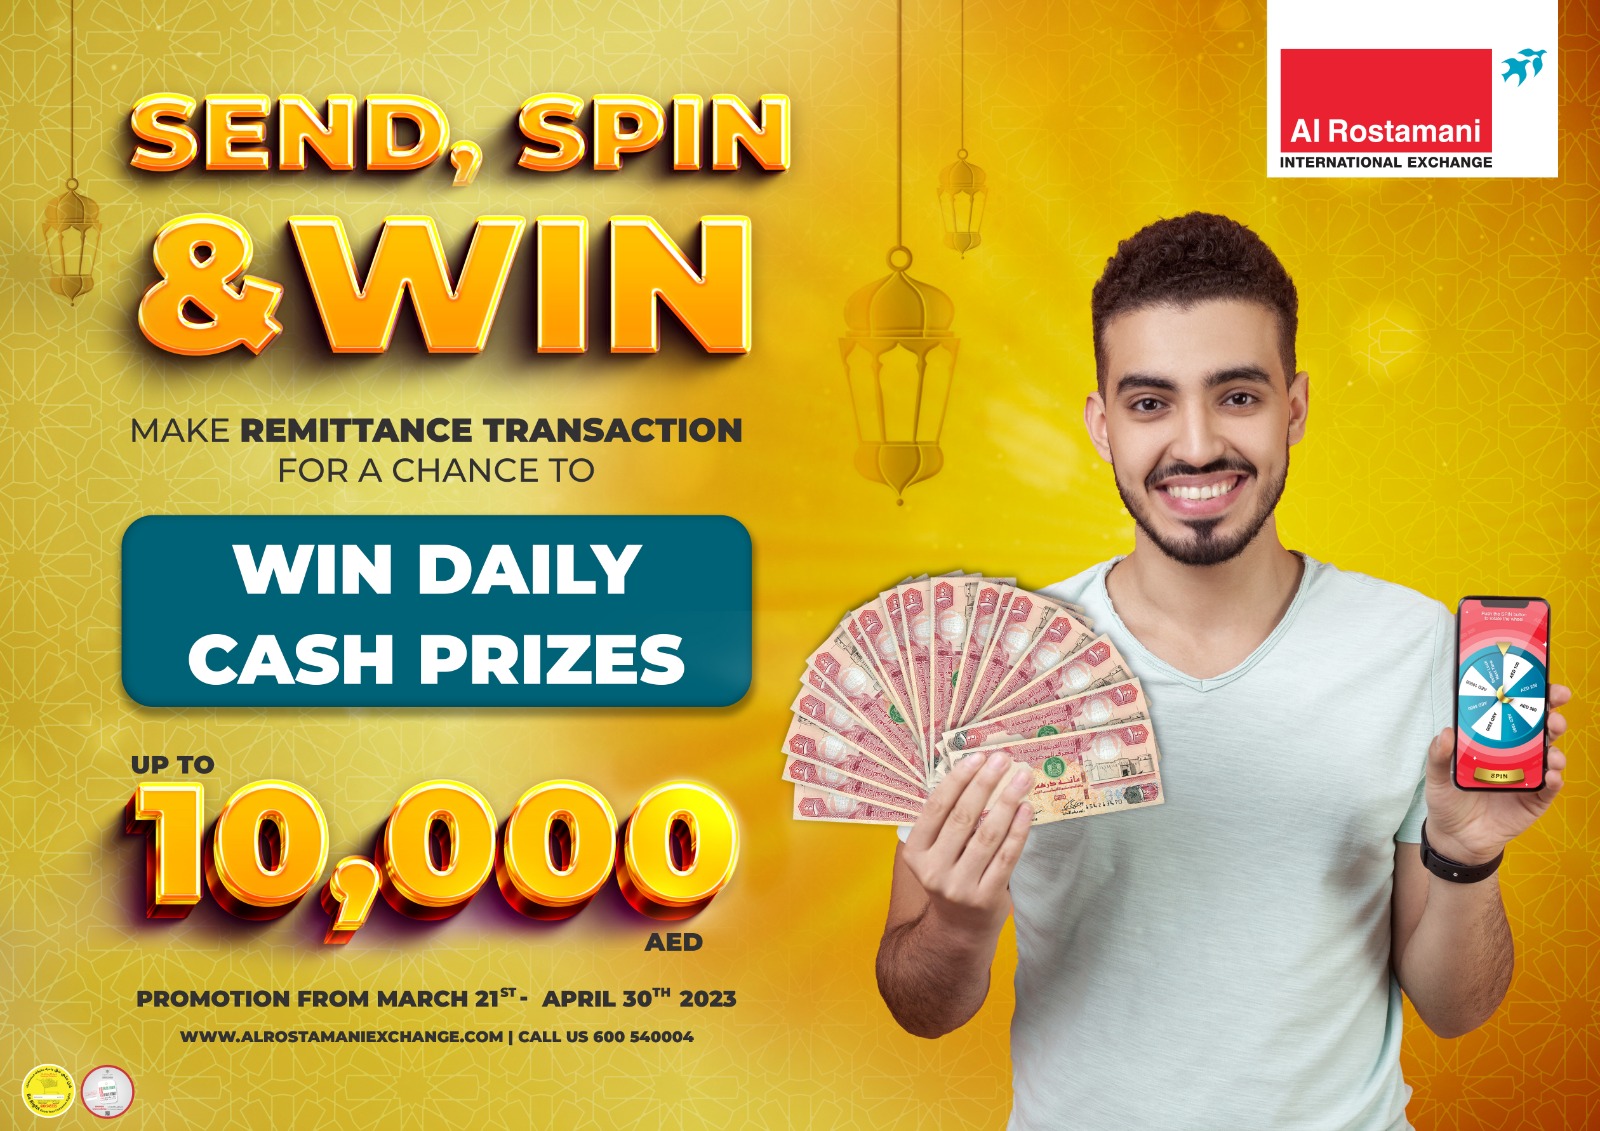 Send money and win digital promotion